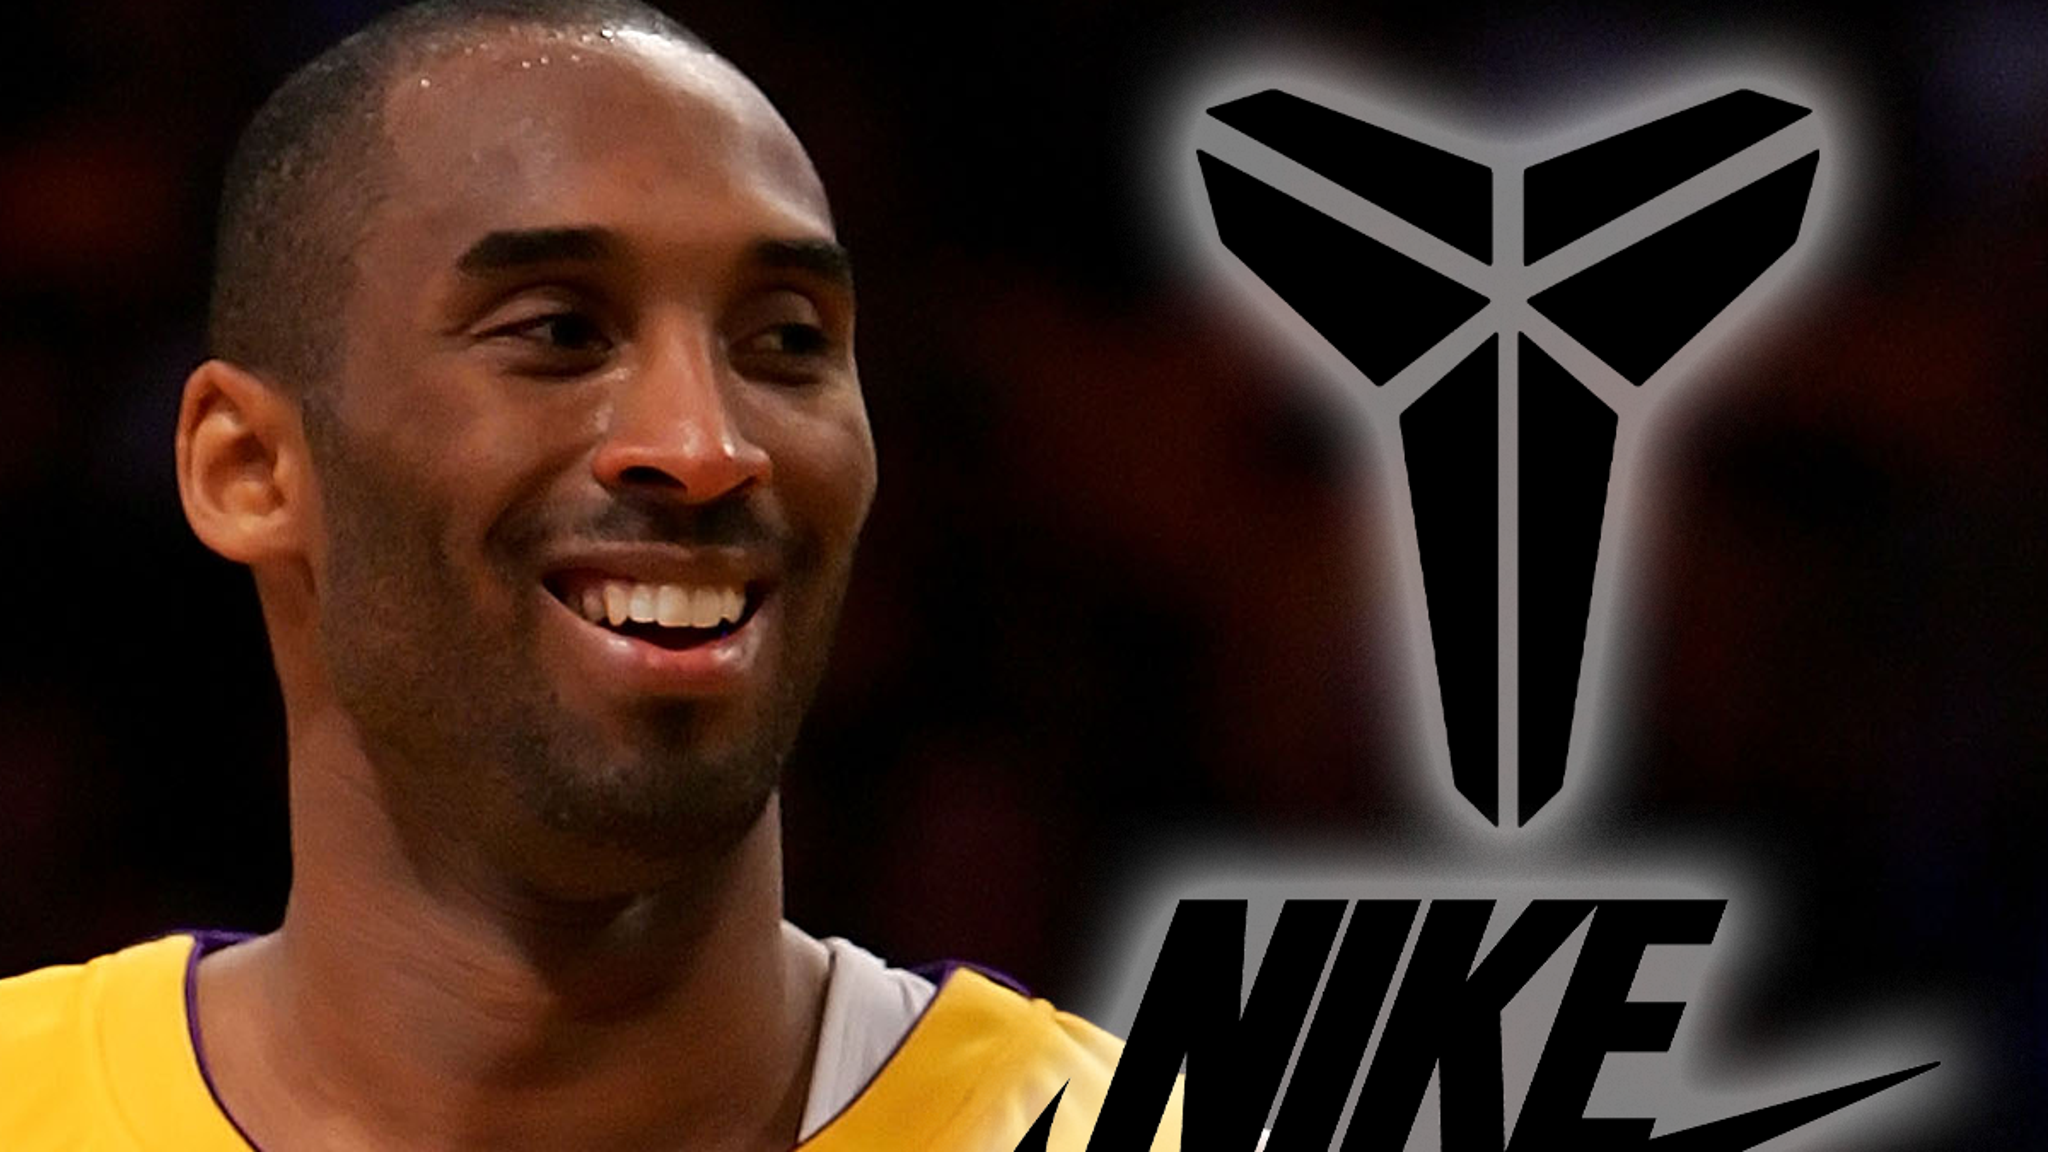 Lakers: Nike officially confirms relaunch of Kobe Bryant brand, unveiling  date revealed